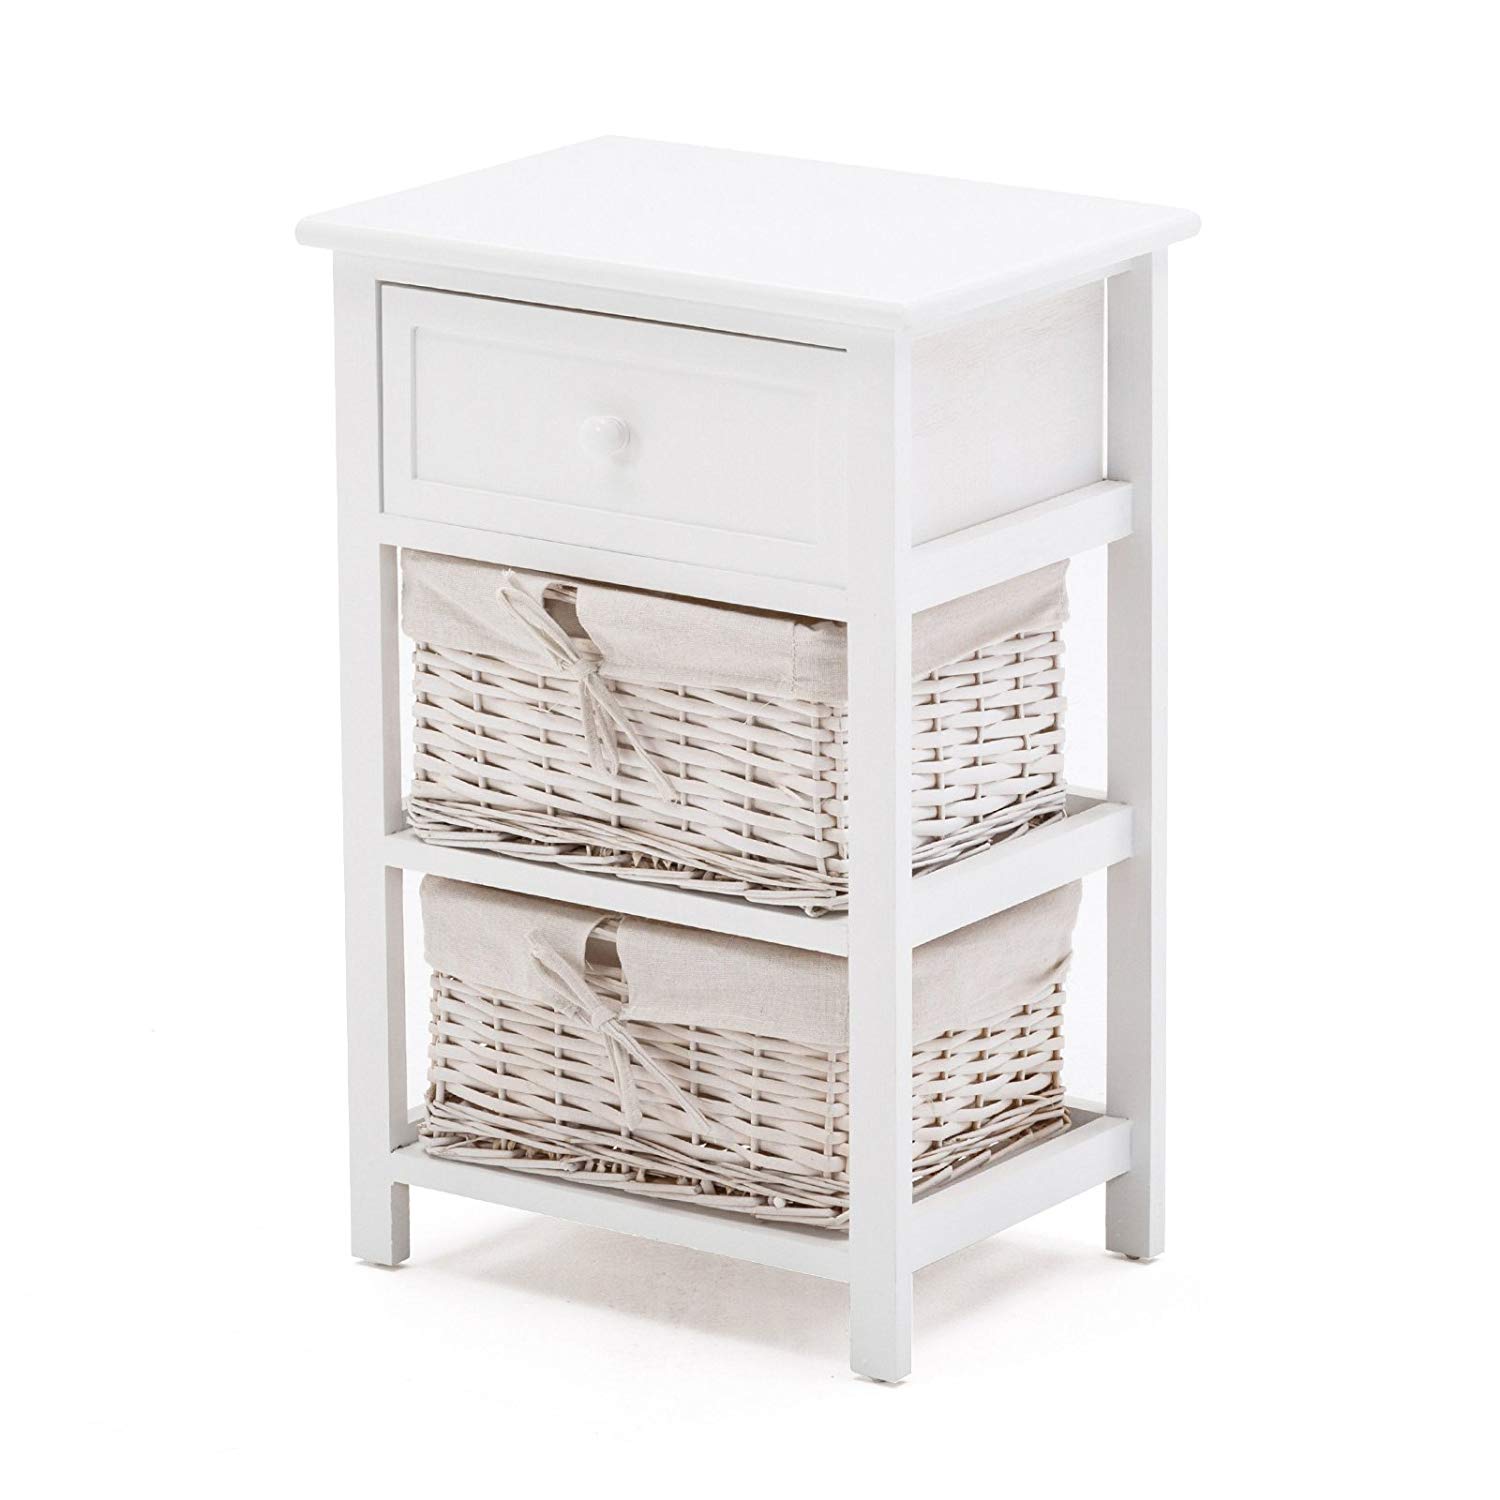 suncoo white vintage storage drawer baskets and open accent table with shelf for bedroom bedside end night kitchen dining half moon occasional west elm box frame funky chairs